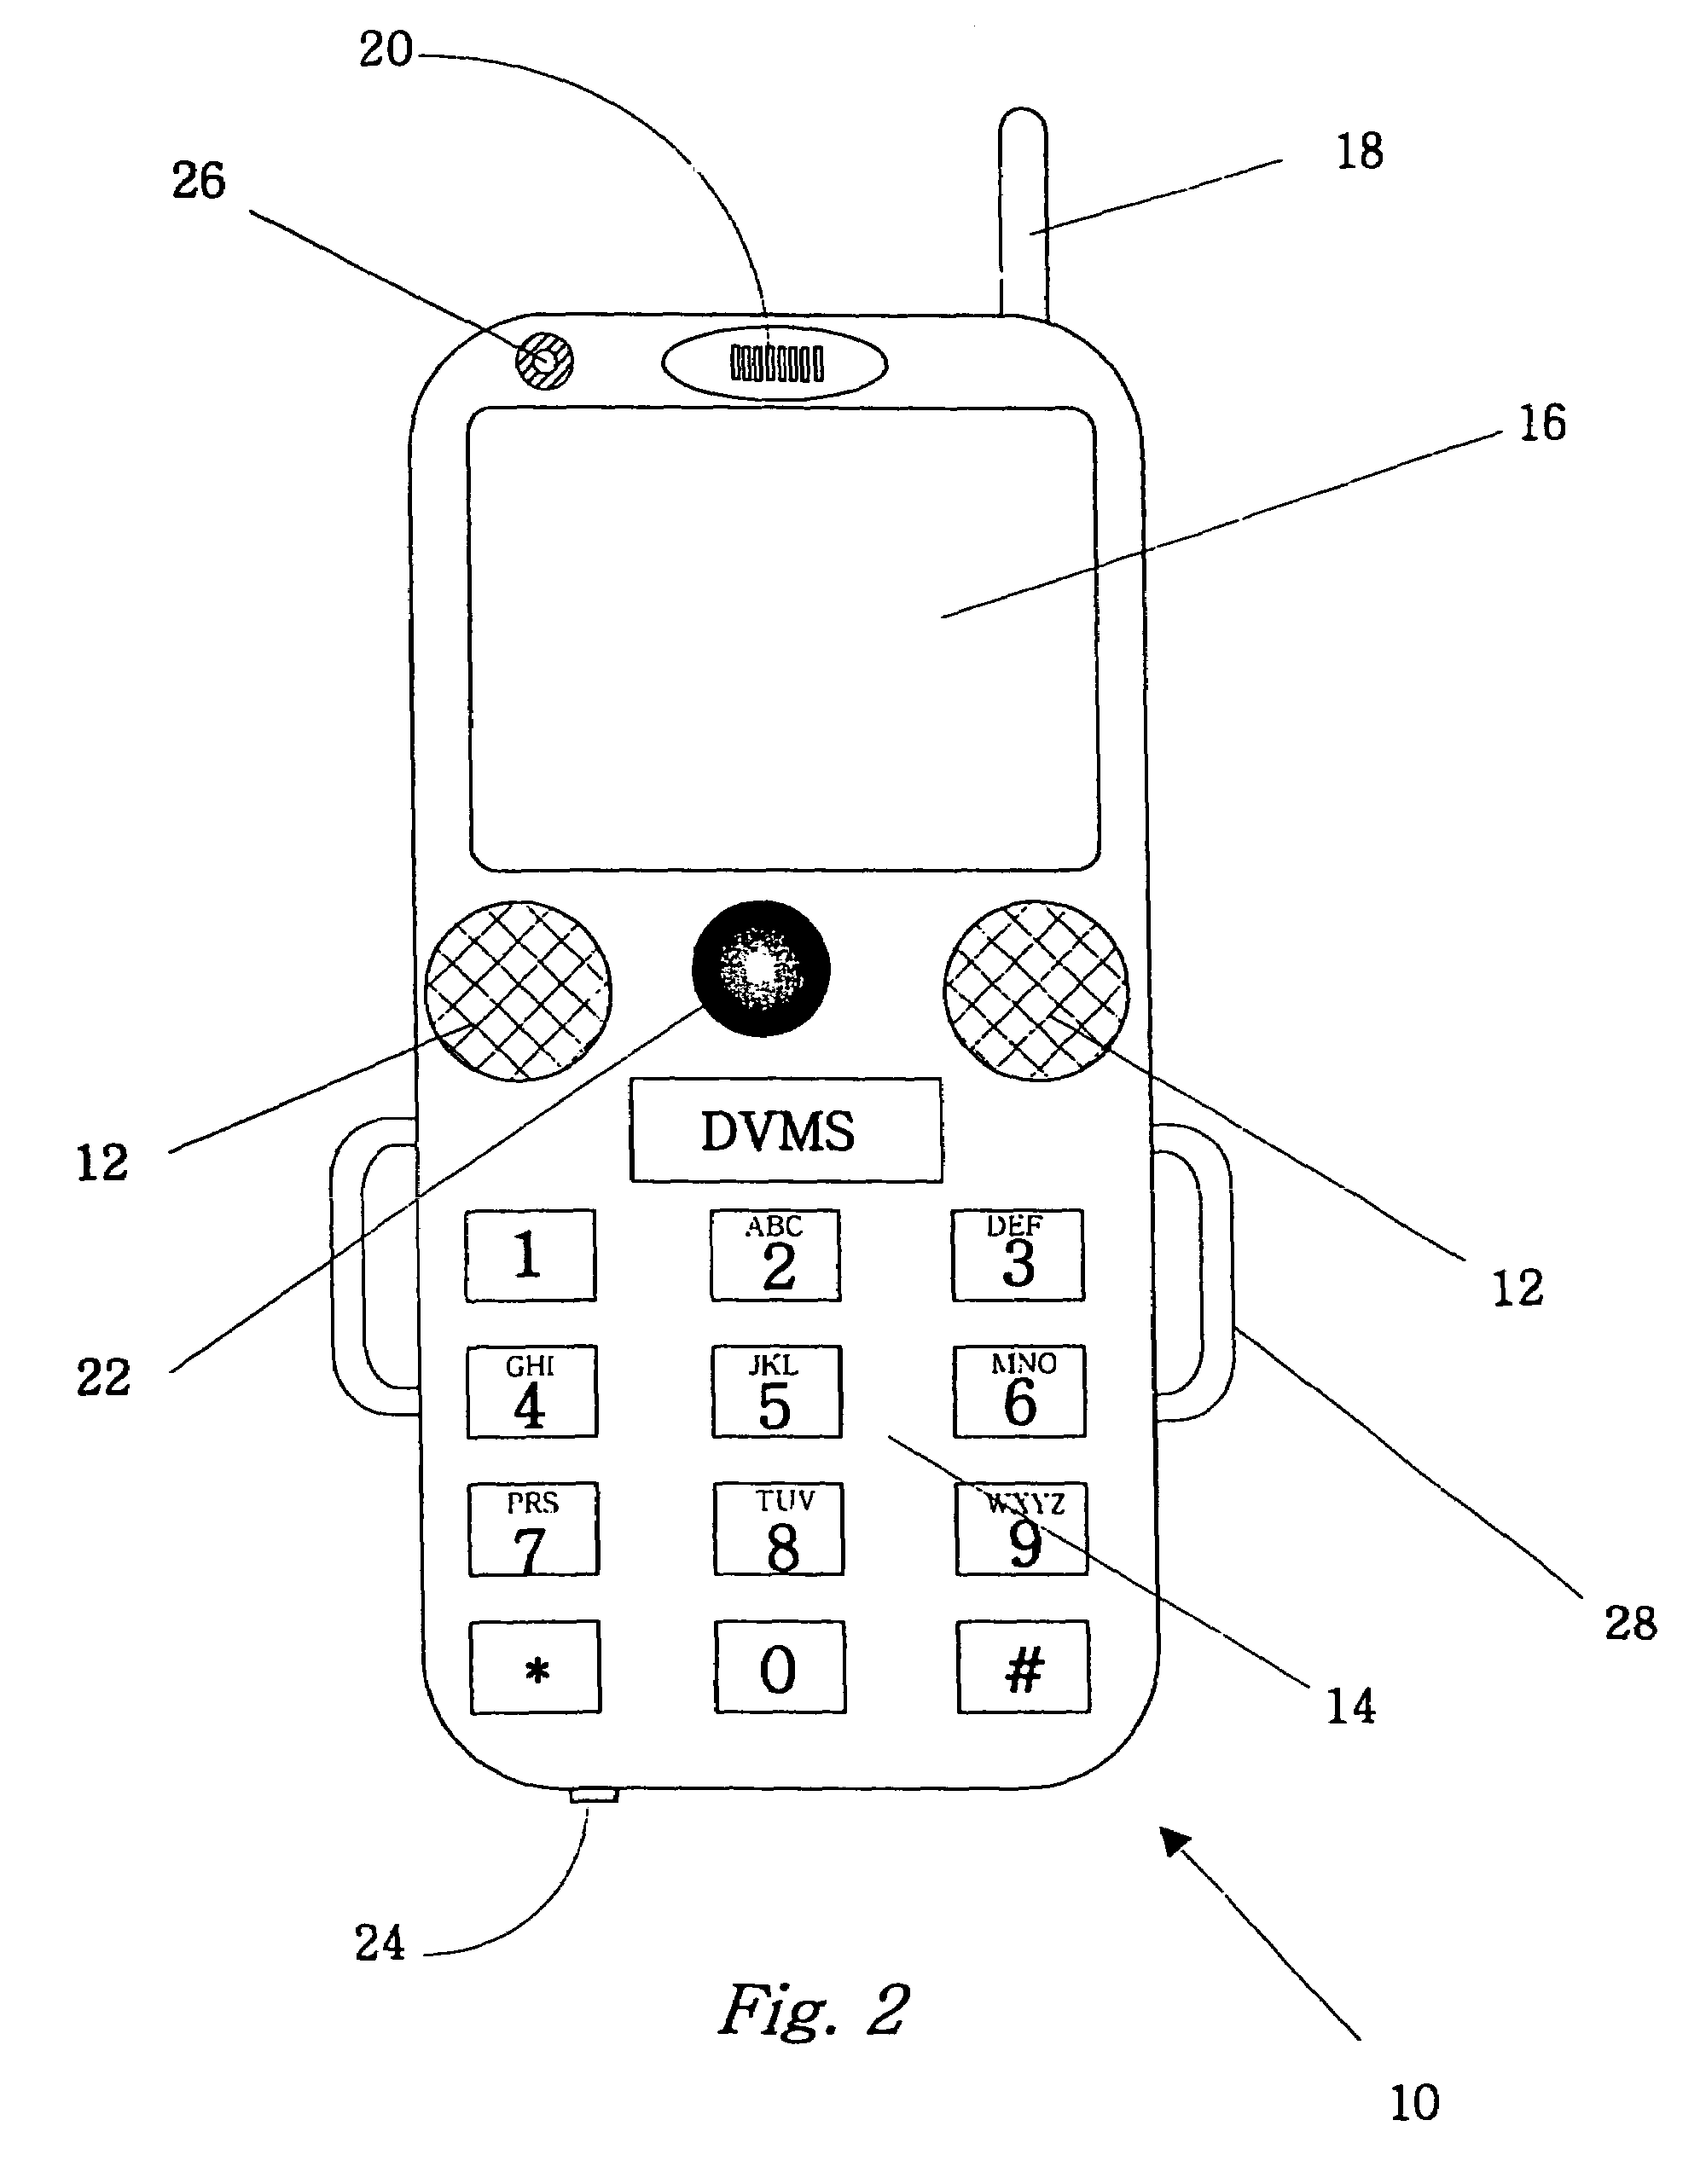 Automated audio video messaging and answering system